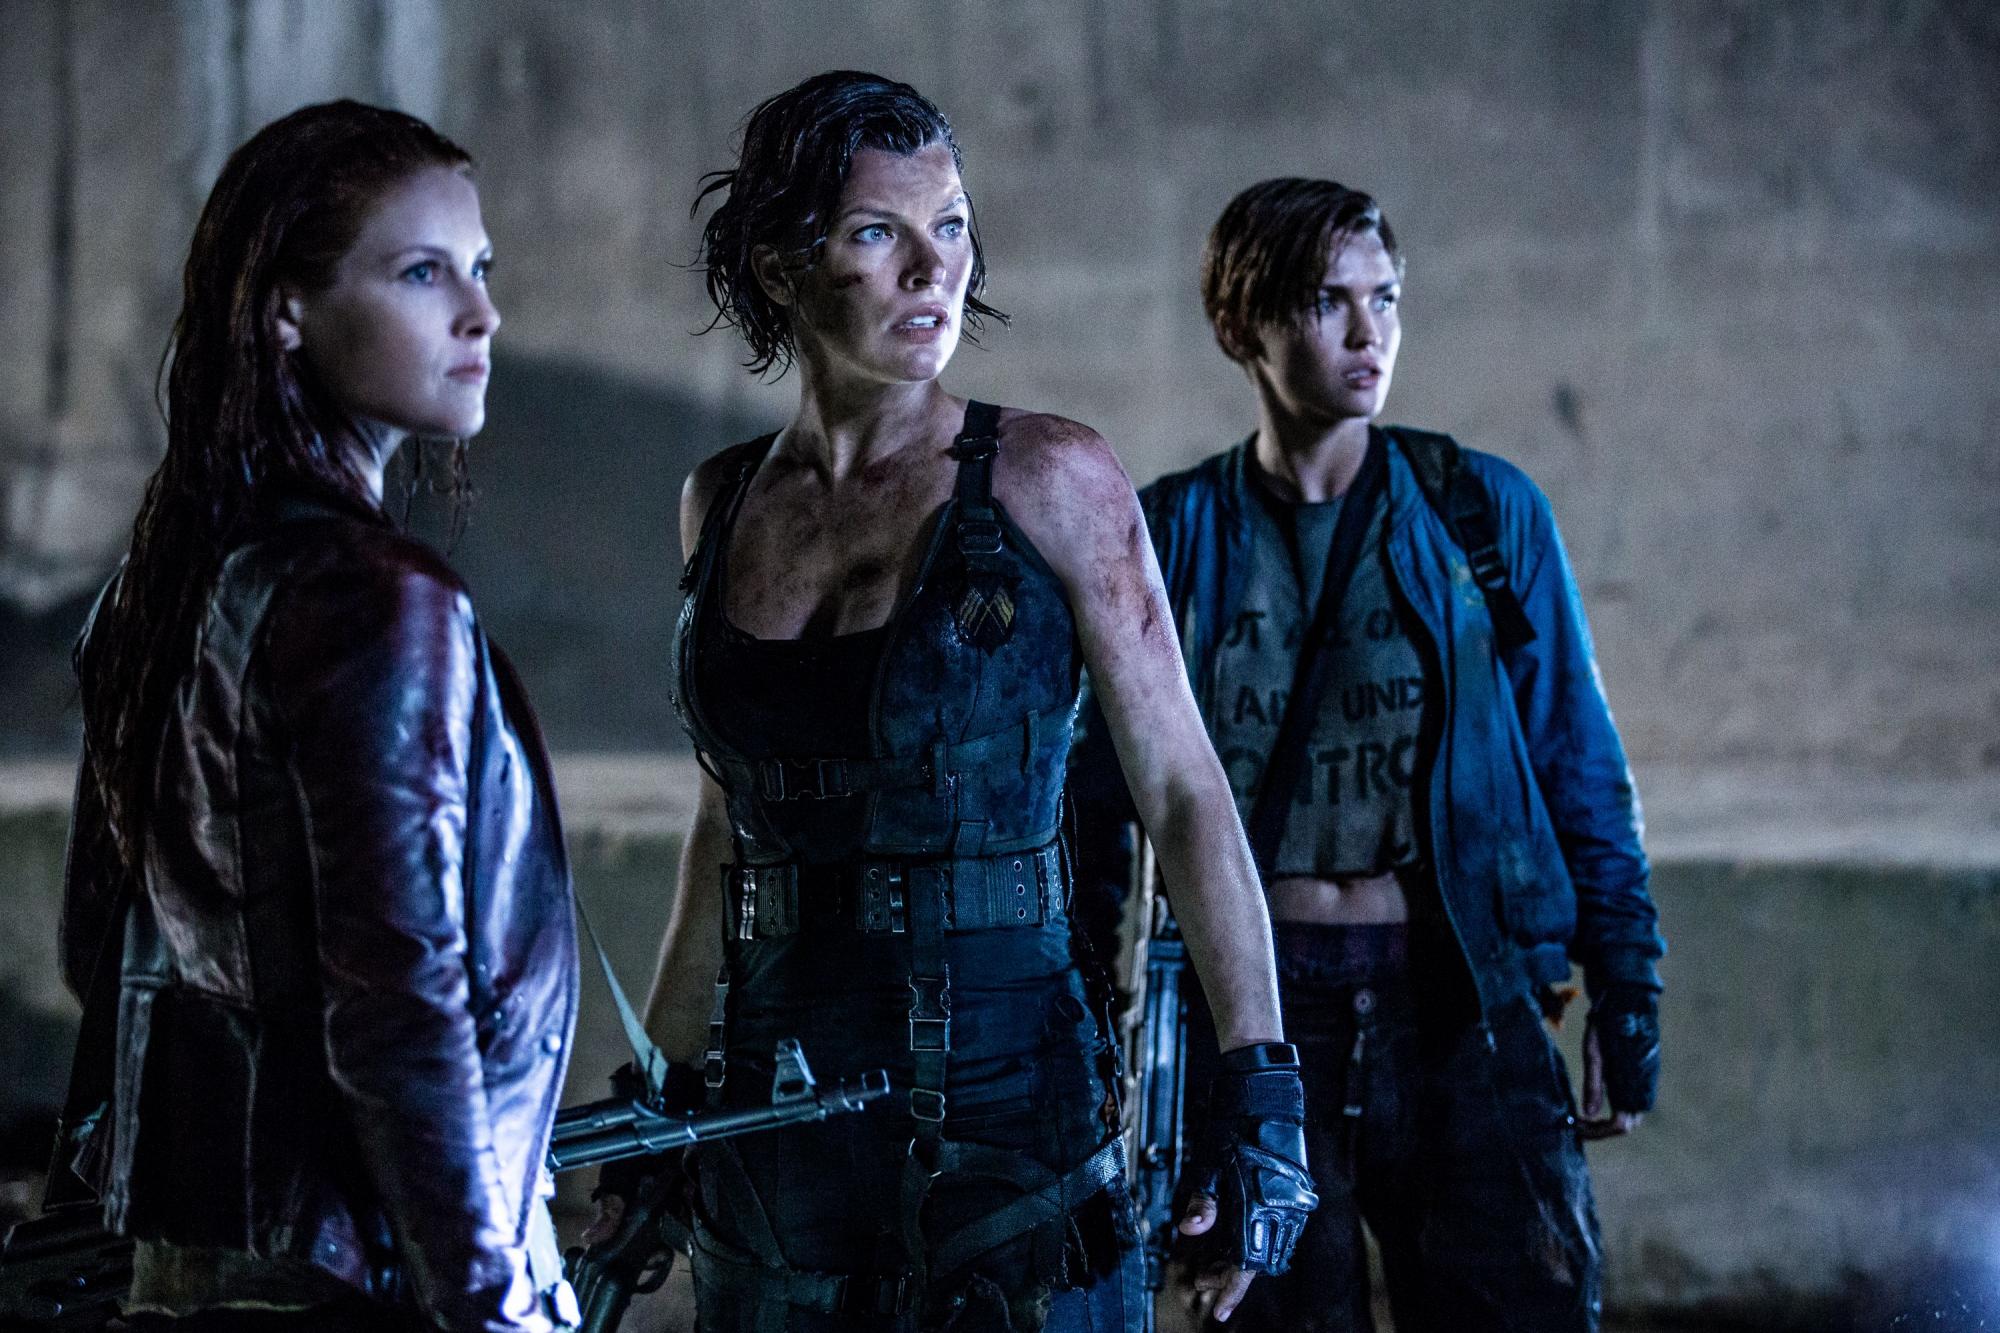 Milla Jovovich & Ali Larter Drop New 'Resident Evil' Trailer at NYCC -  Watch Now!: Photo 3780384